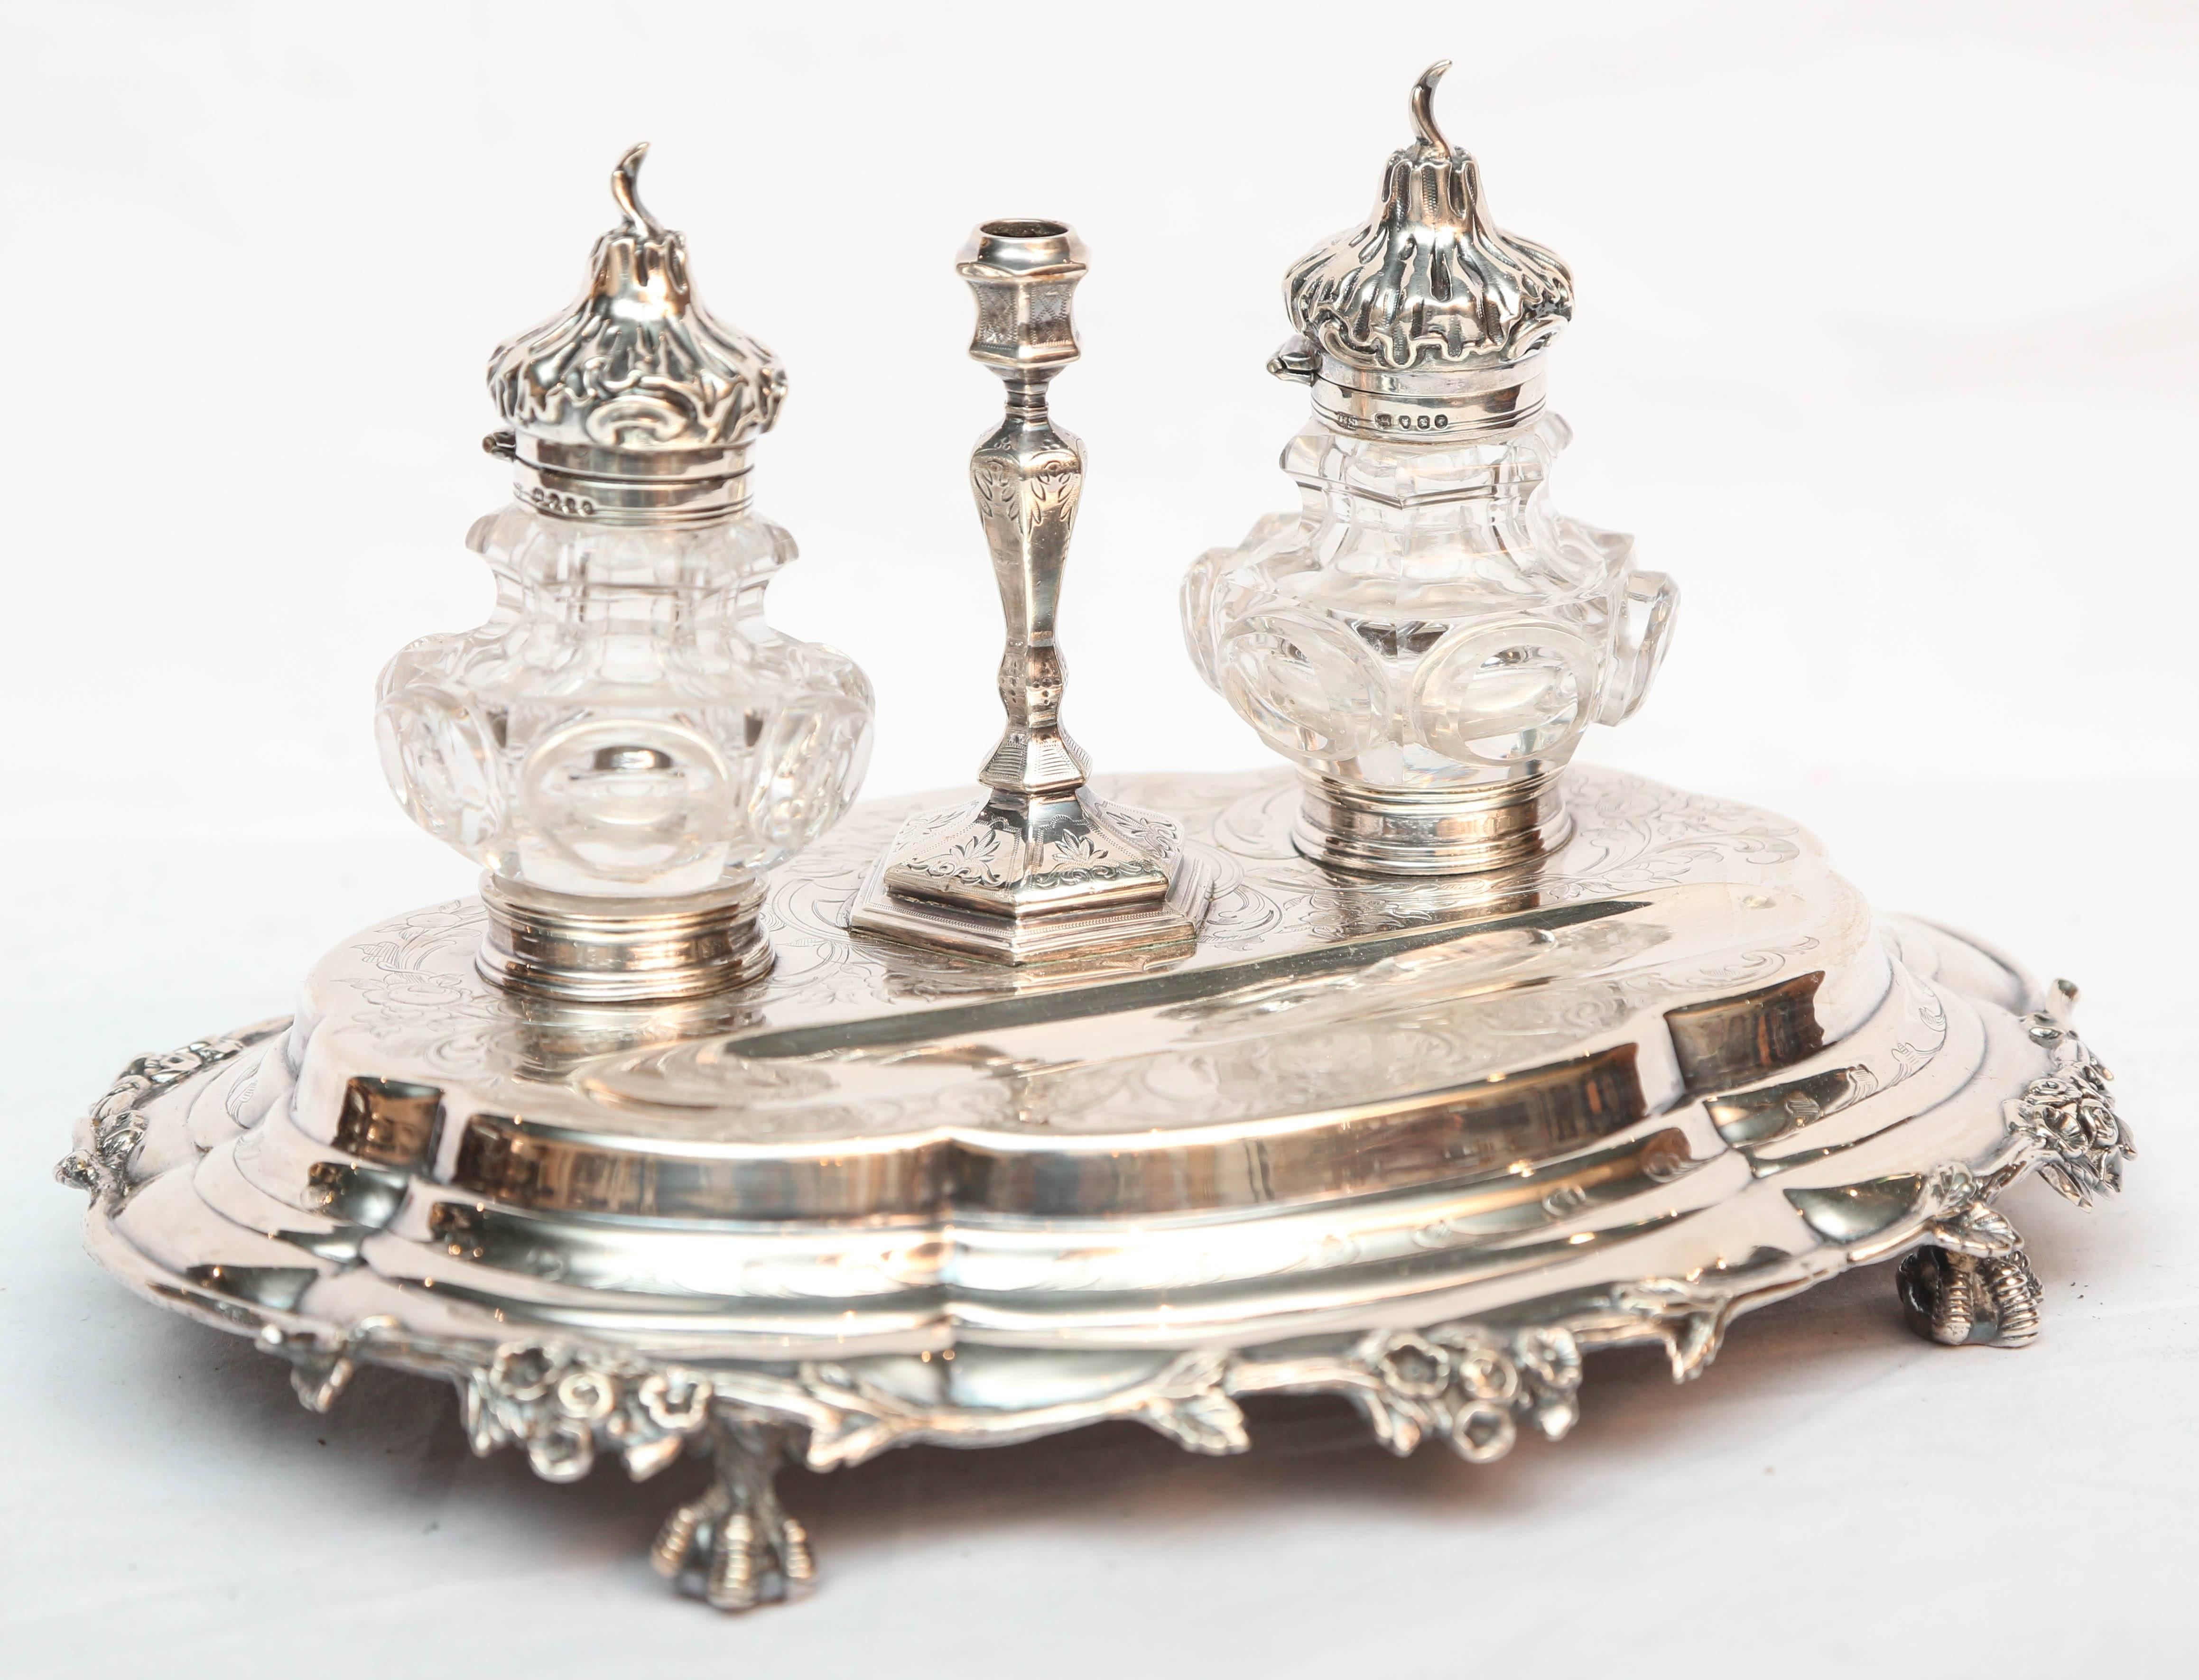 Beautiful style and detail with removable inkwells with sterling tops. The stand is raised upon ball and claw feet.